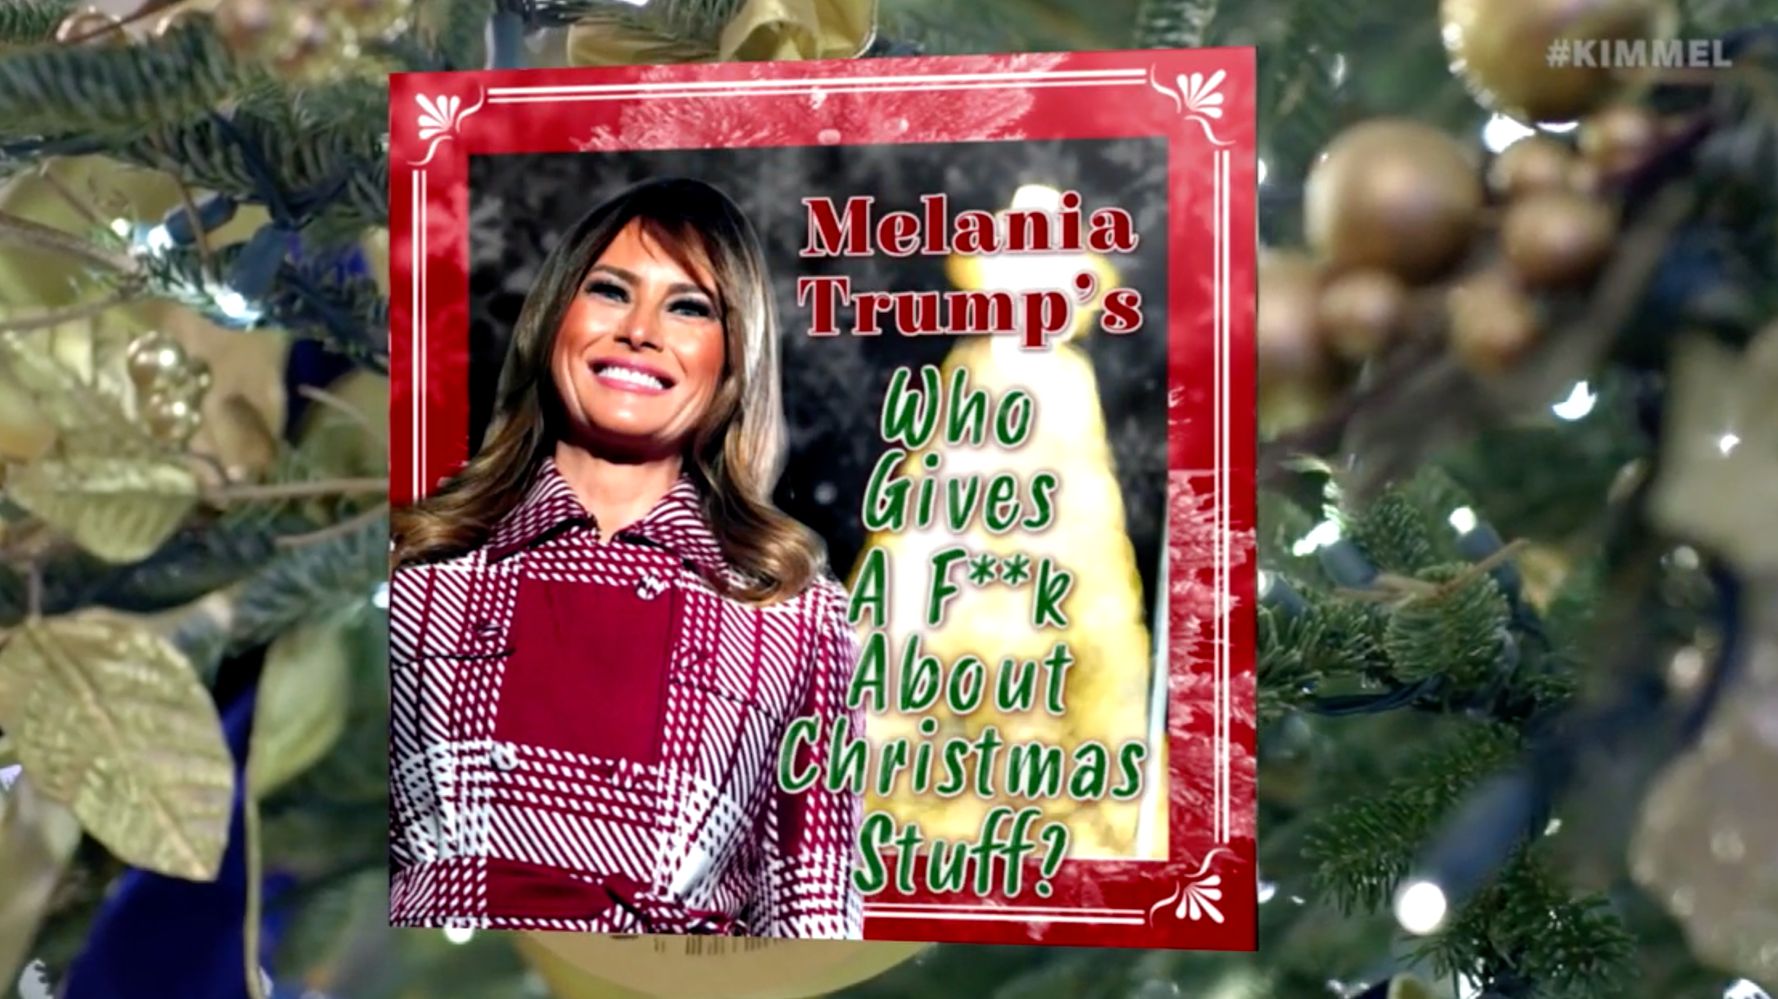 Melania Trump Really Hates Christmas In 'Kimmel' Spoof Of White House Holiday Video